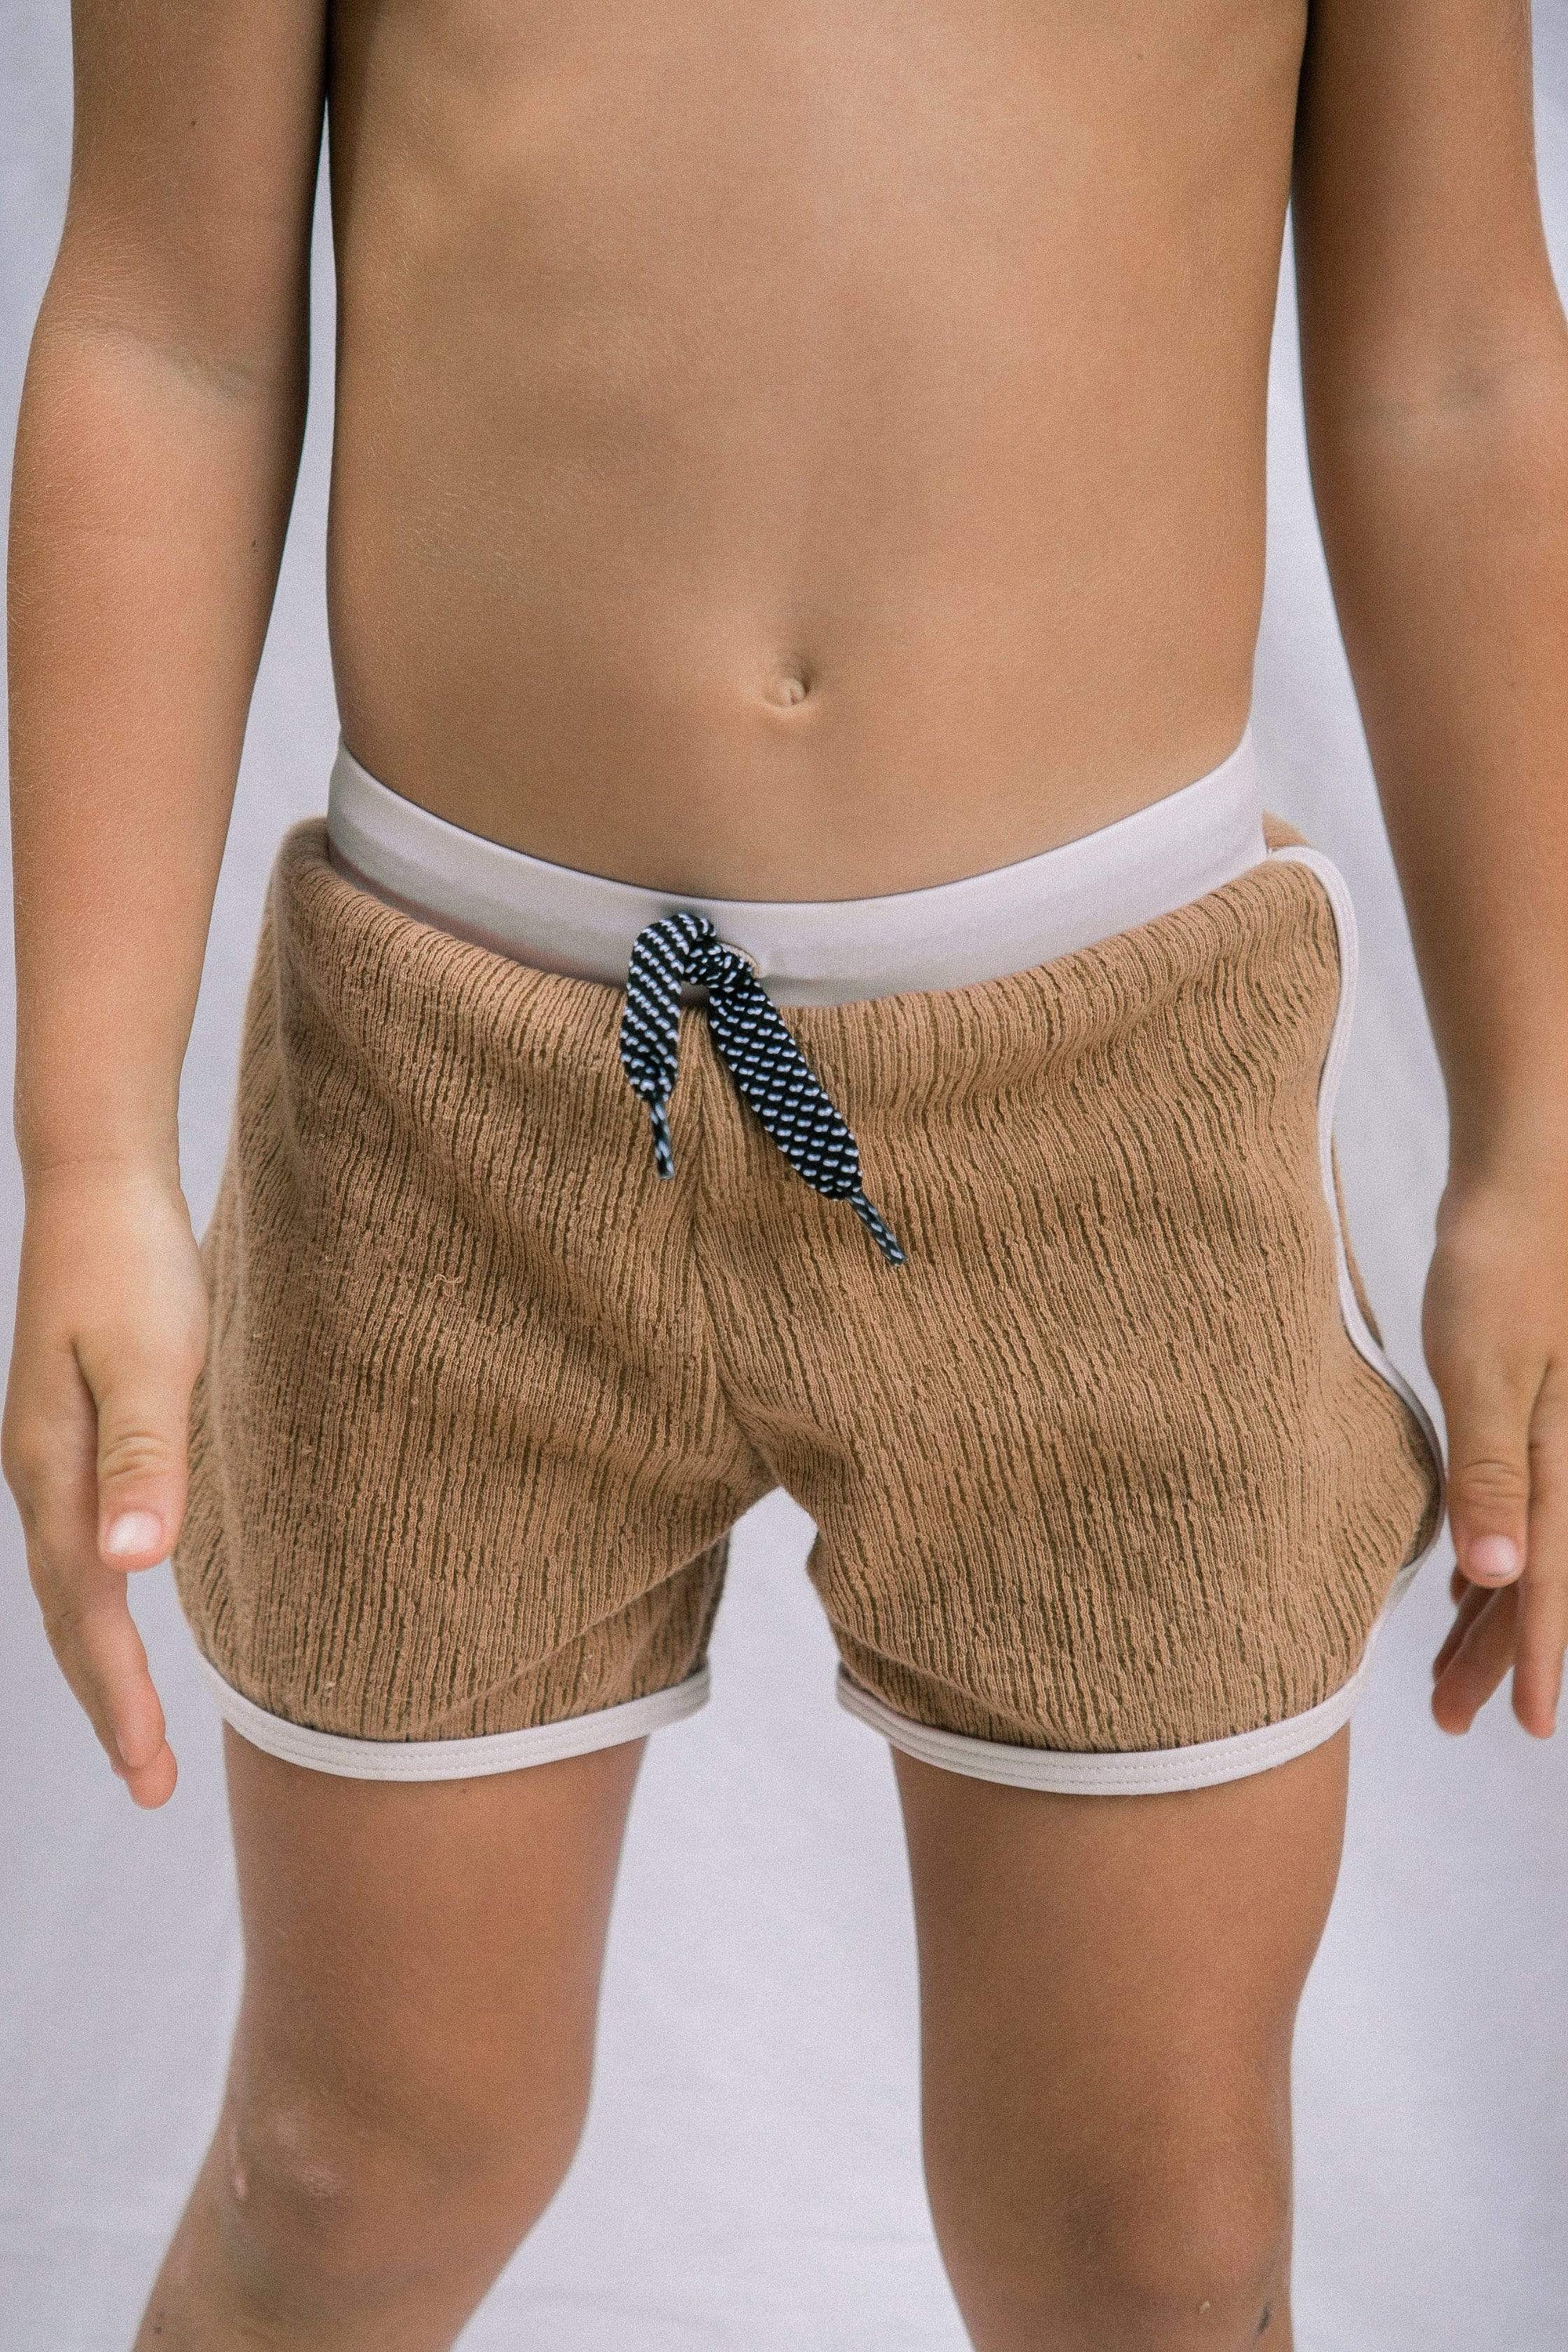 Toddler Soft Shorts for Swim in Camel Texture